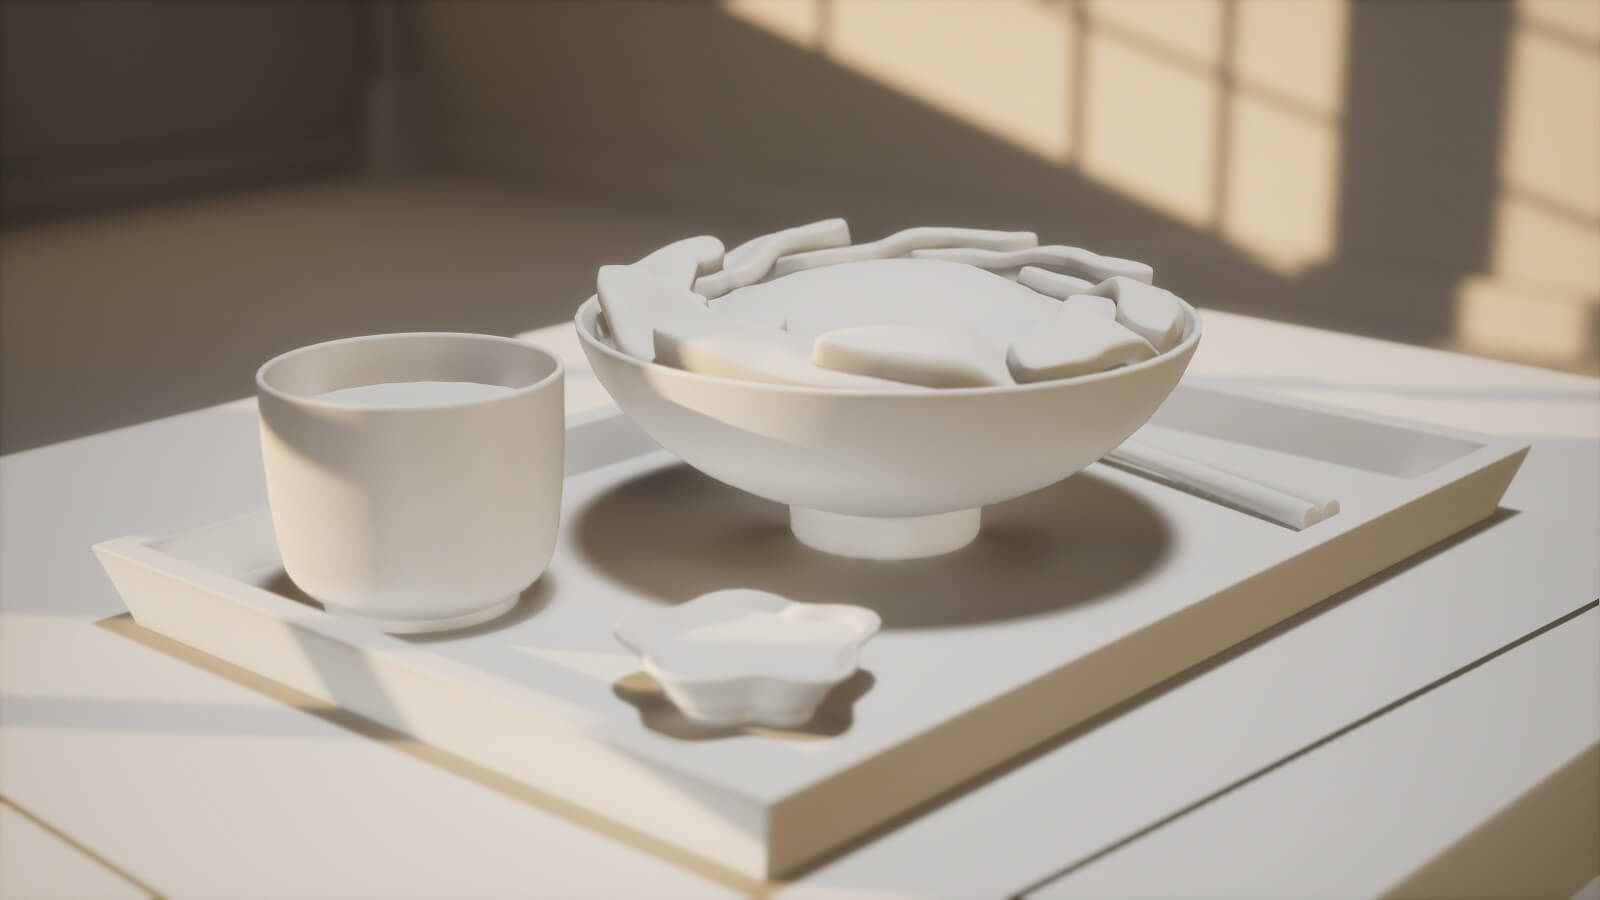 White untextured 3D models of dishes on a meal tray